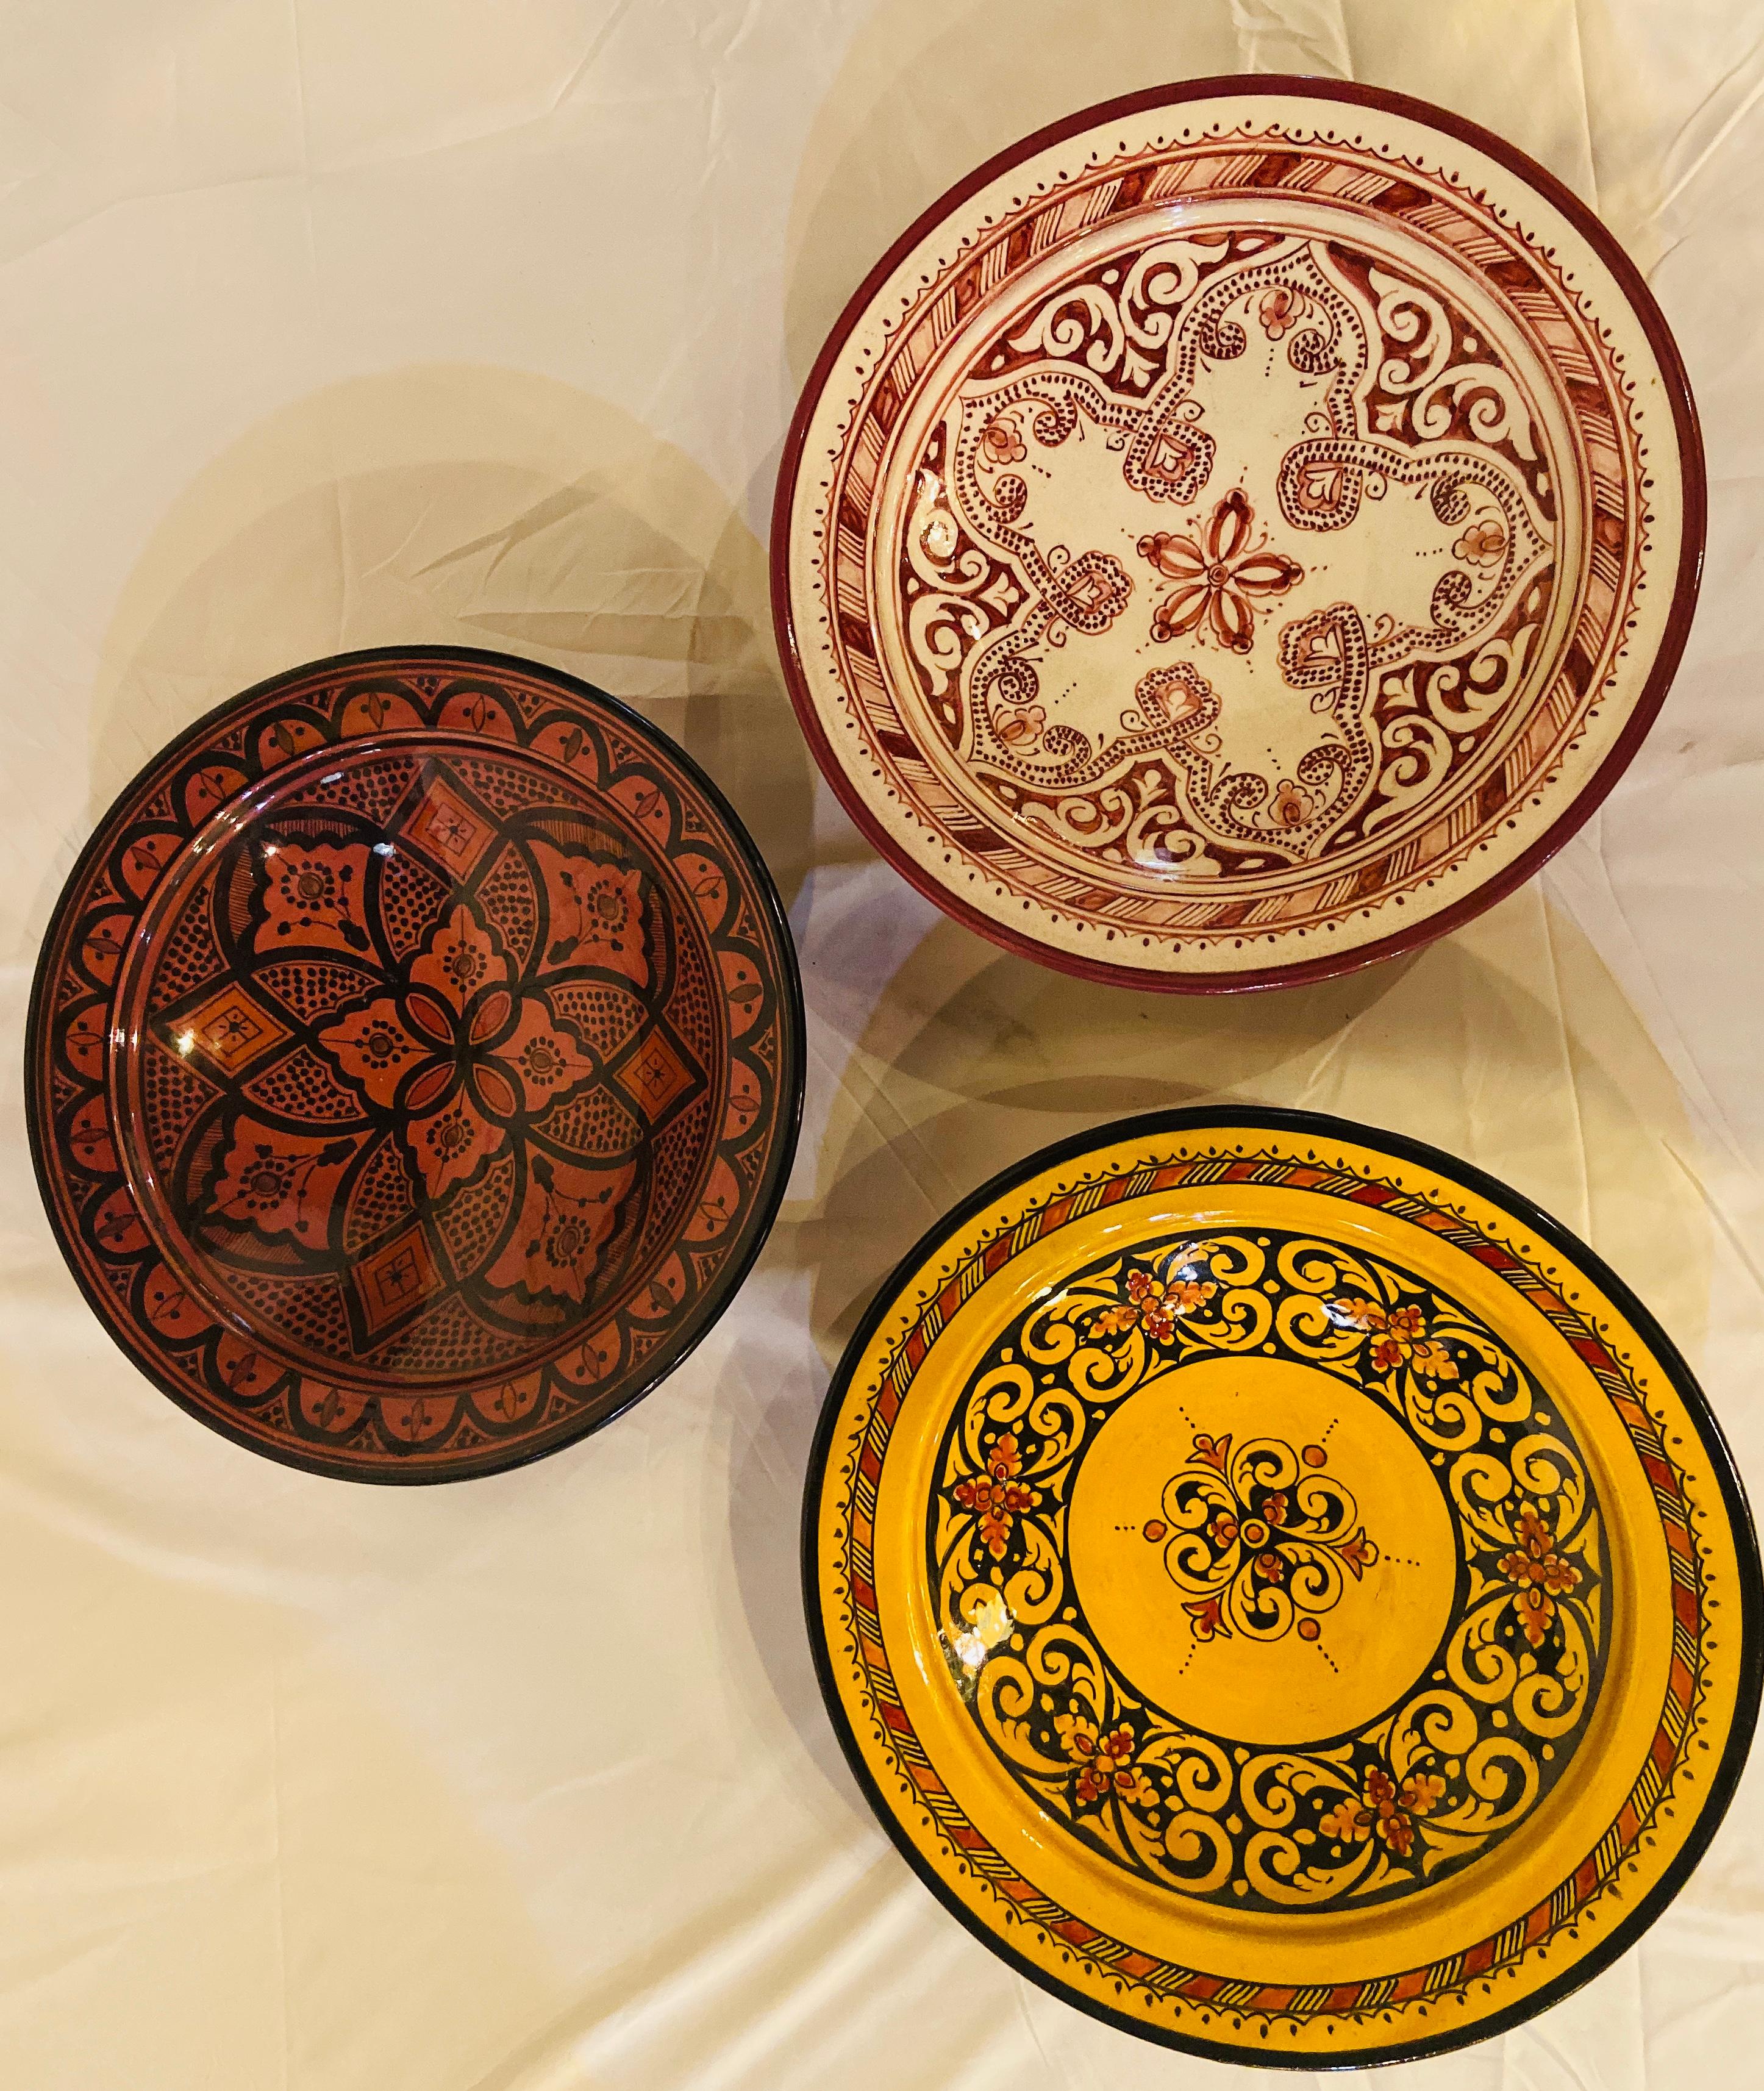 With a delightful floral and arabesque design hand painted in multiple colors in red, yellow, green, and black. These gorgeous, large-size ceramic dinner plates possess a truly exotic look. Handcrafted in the bustling workshops of master artisans in